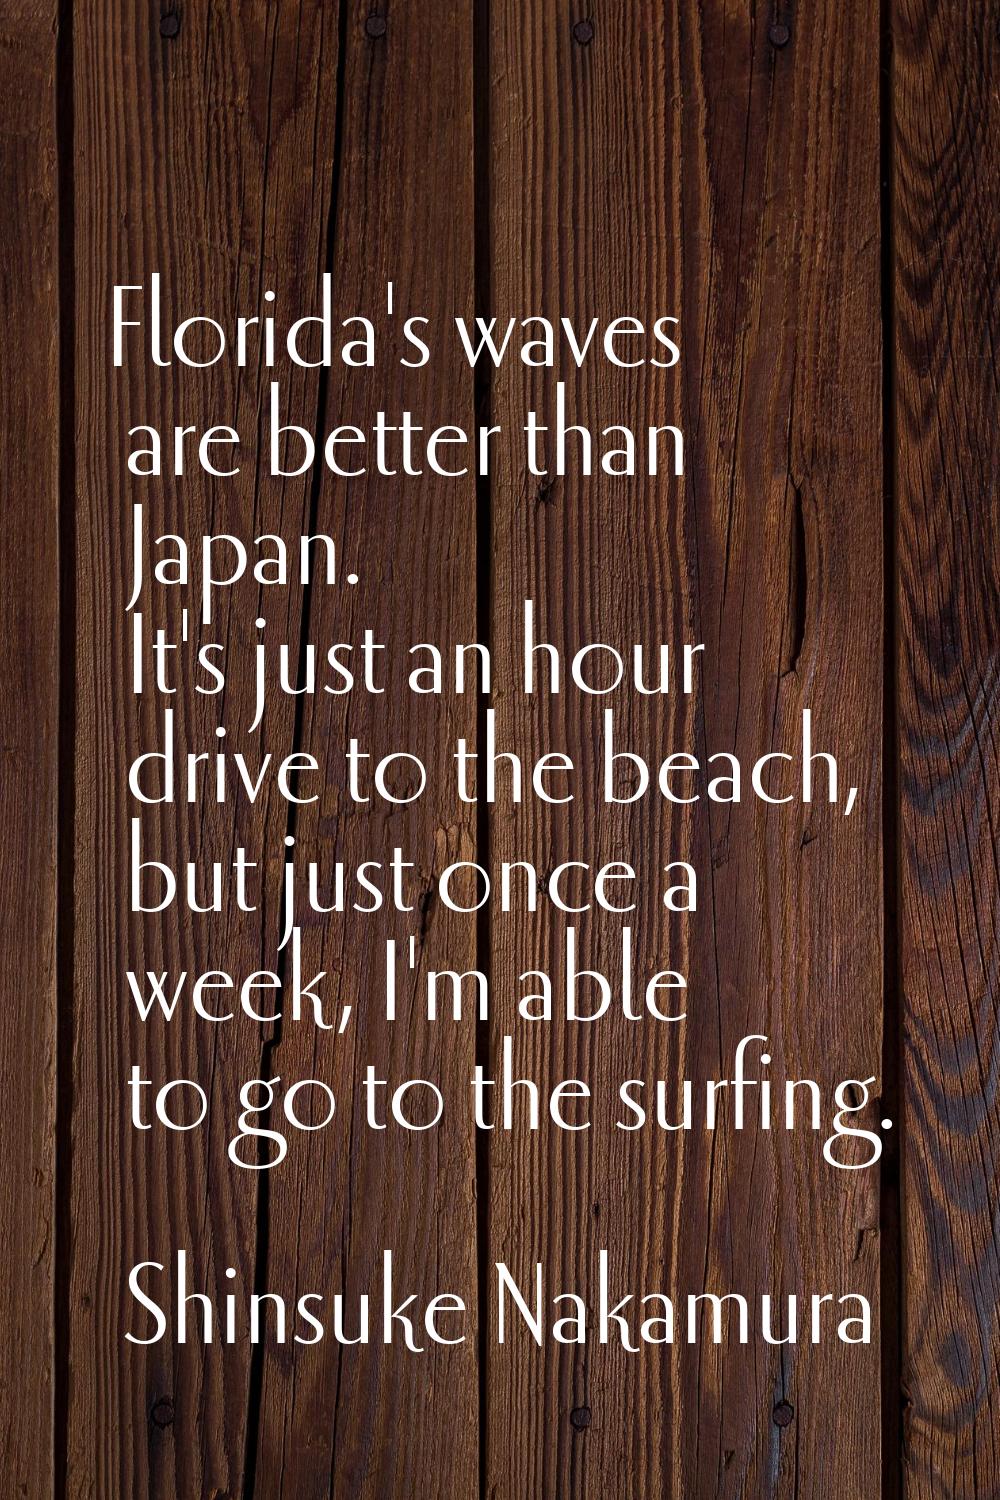 Florida's waves are better than Japan. It's just an hour drive to the beach, but just once a week, 